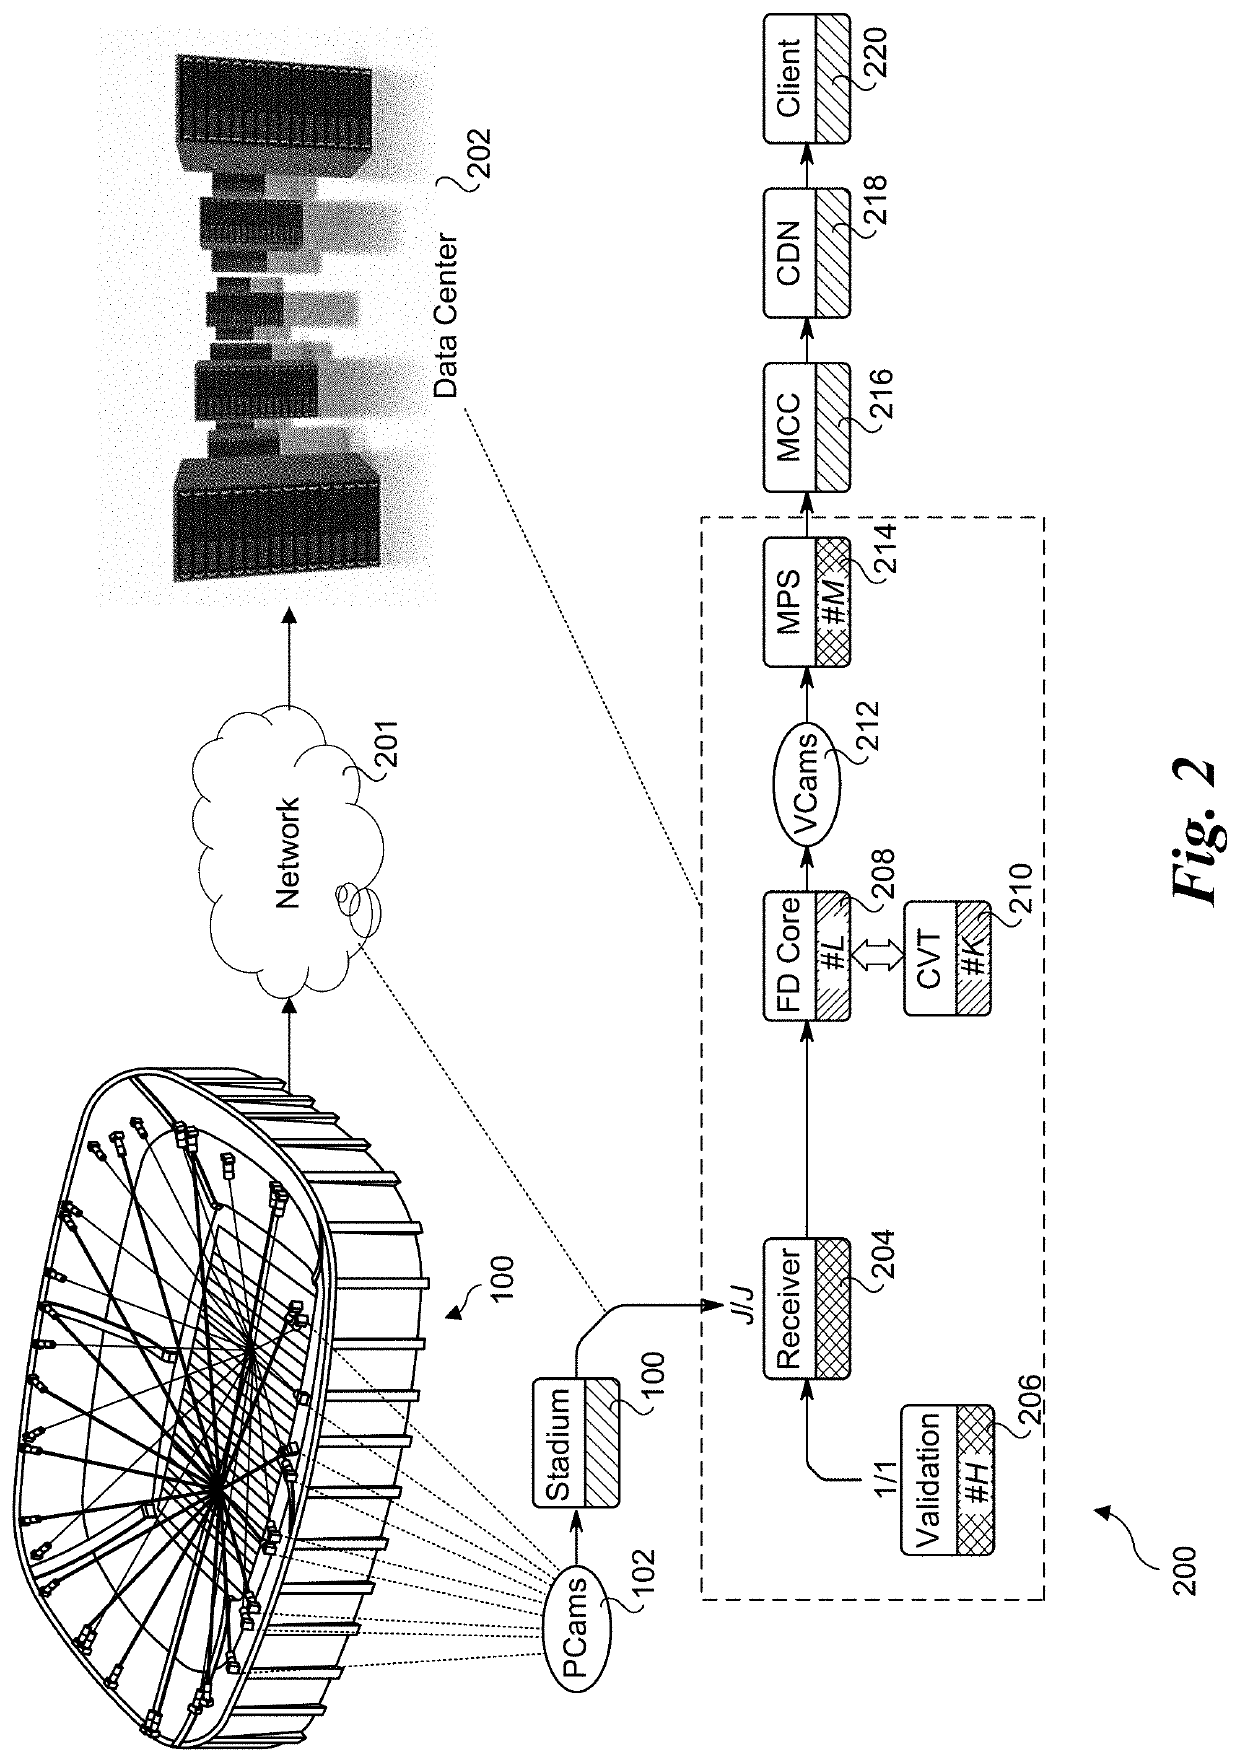 Networking for distributed microservices communication for real-time multi-view computer vision streaming applications